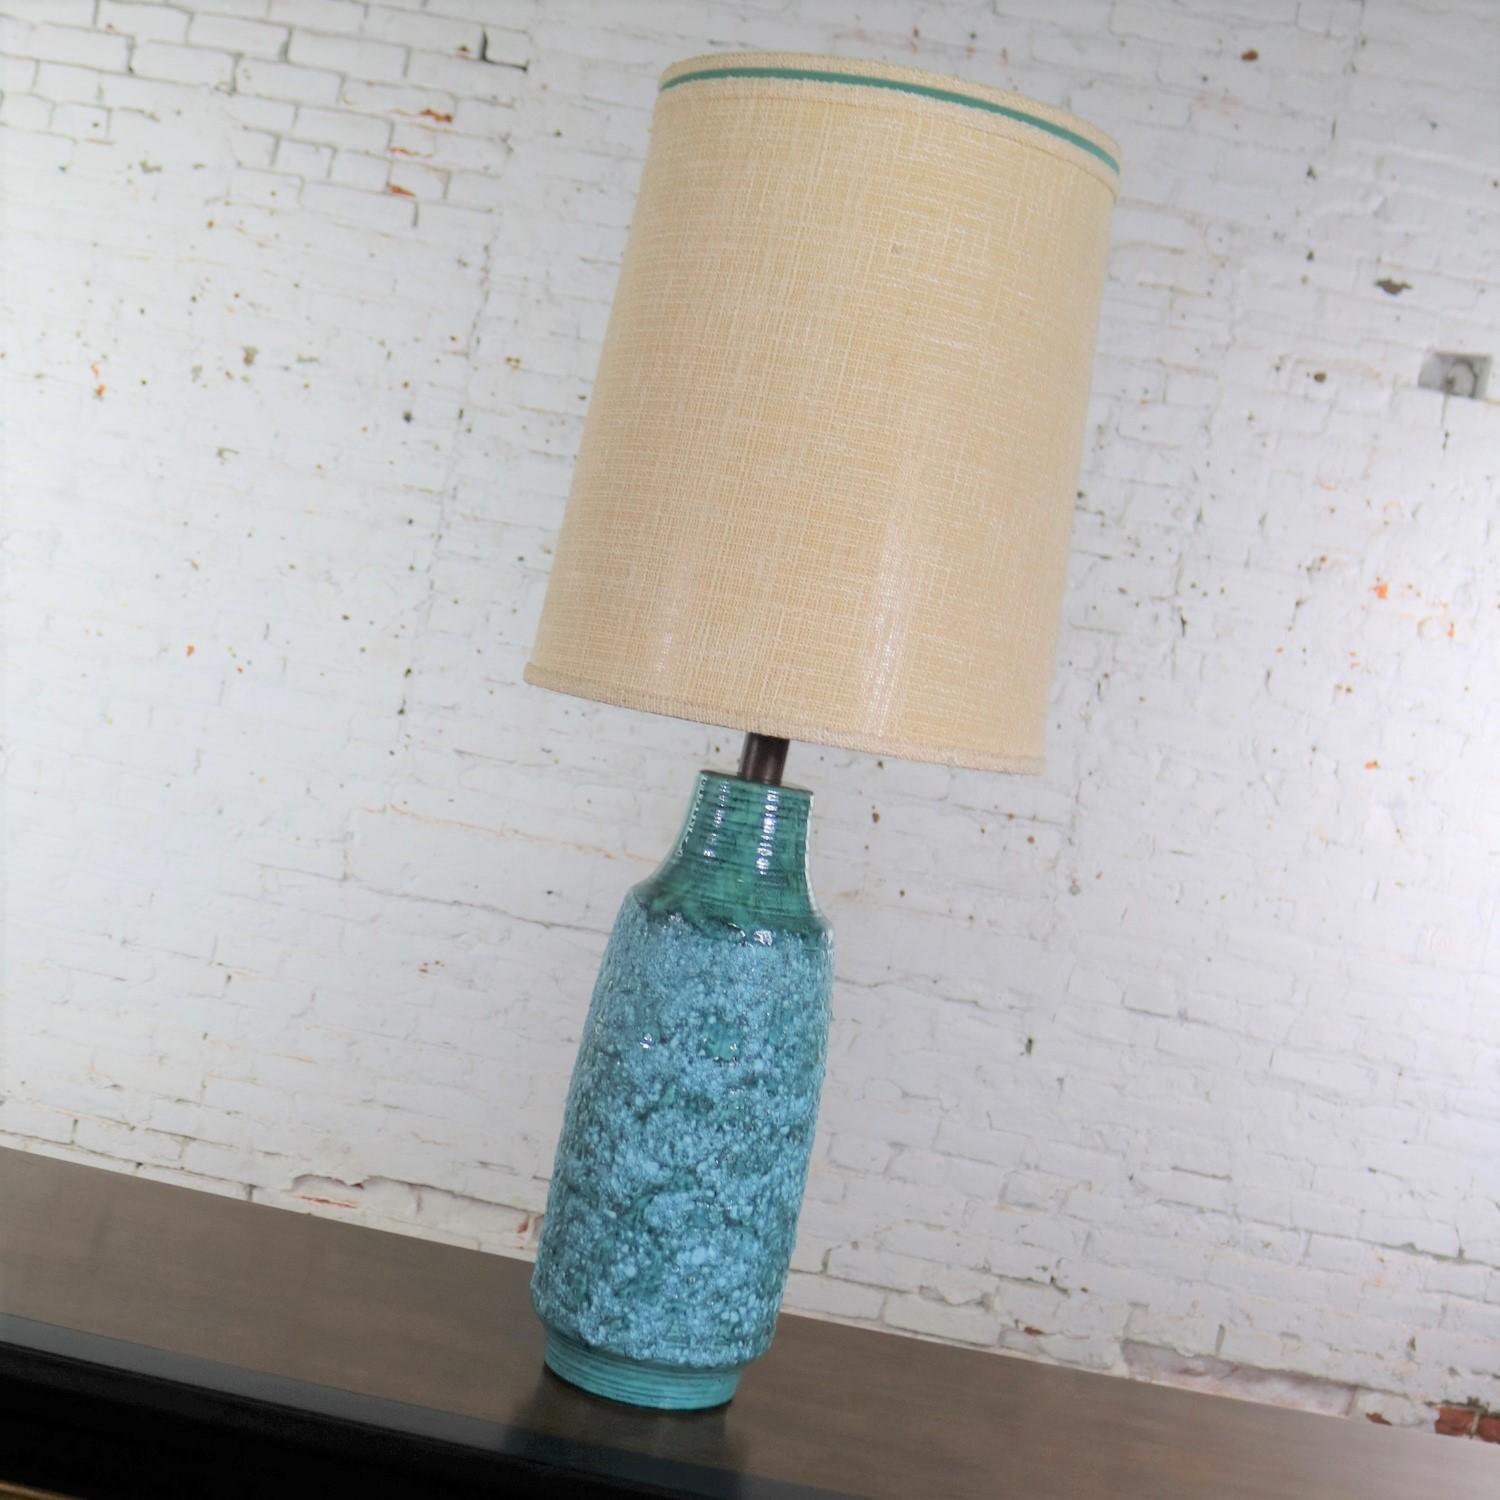 Handsome very large Mid-Century Modern ceramic table lamp with a gorgeous turquoise lava glaze and its original shade done in the style of the famed Fantoni. This great lamp is in wonderful vintage condition as is the large drum shade. Please see